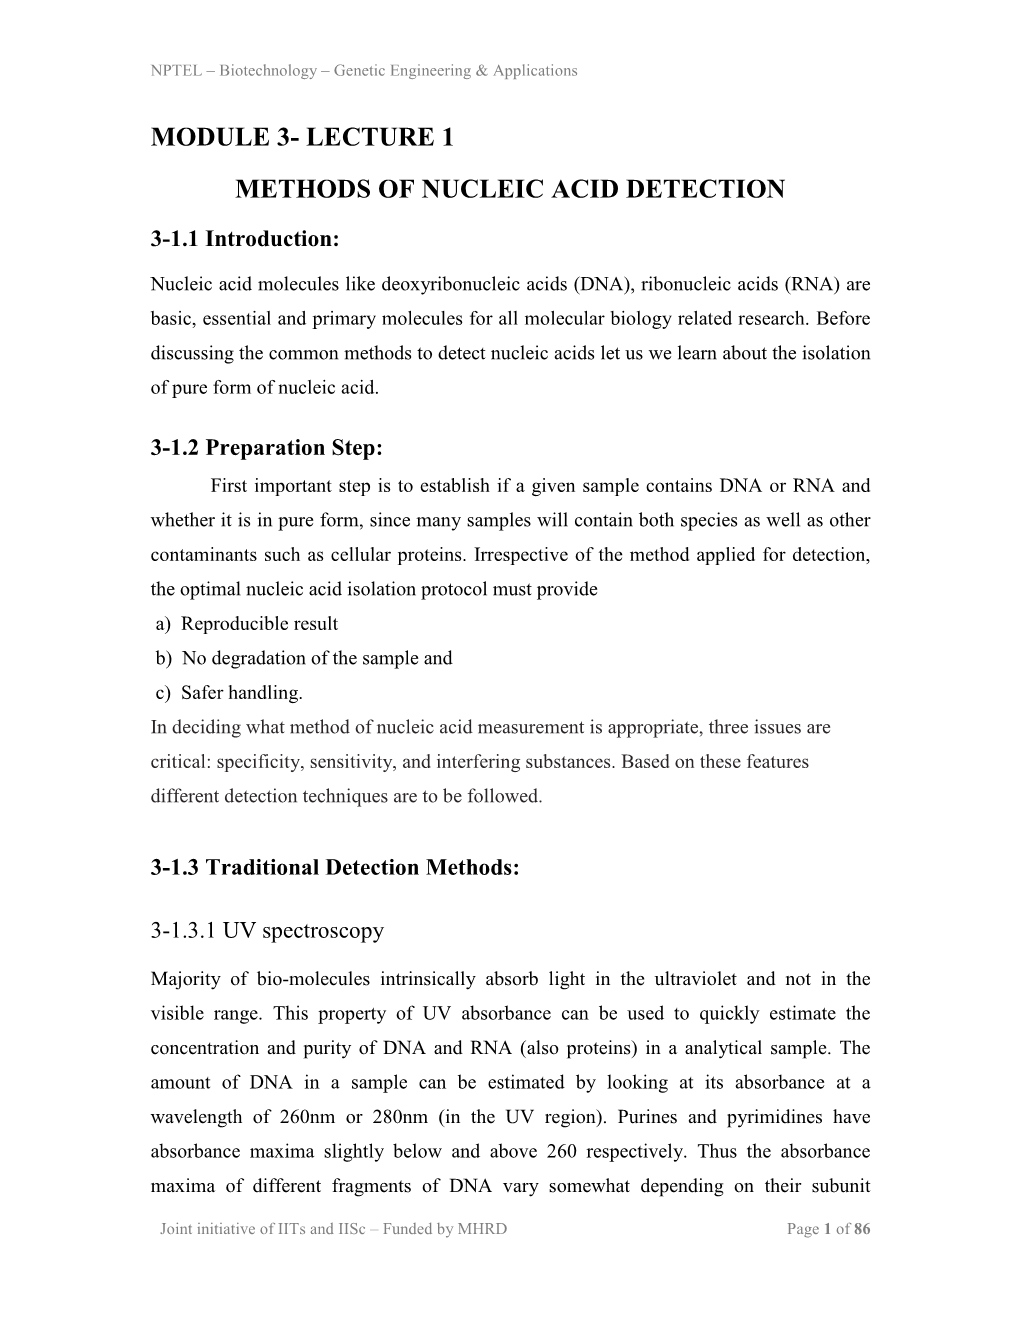 Module 3- Lecture 1 Methods of Nucleic Acid Detection